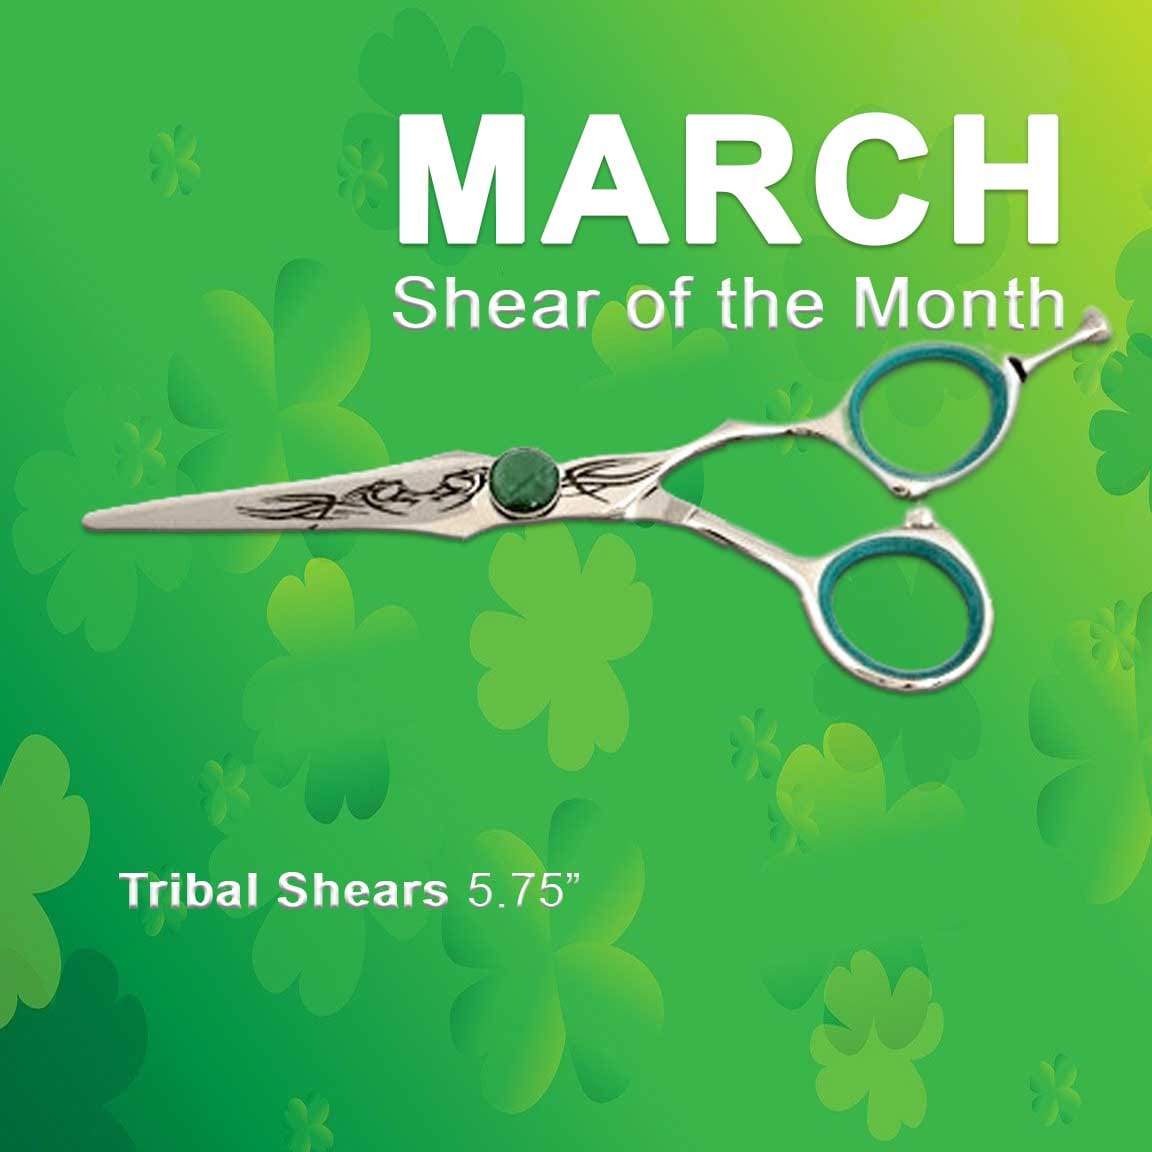 March Shear of the Month J-Tribal Shear